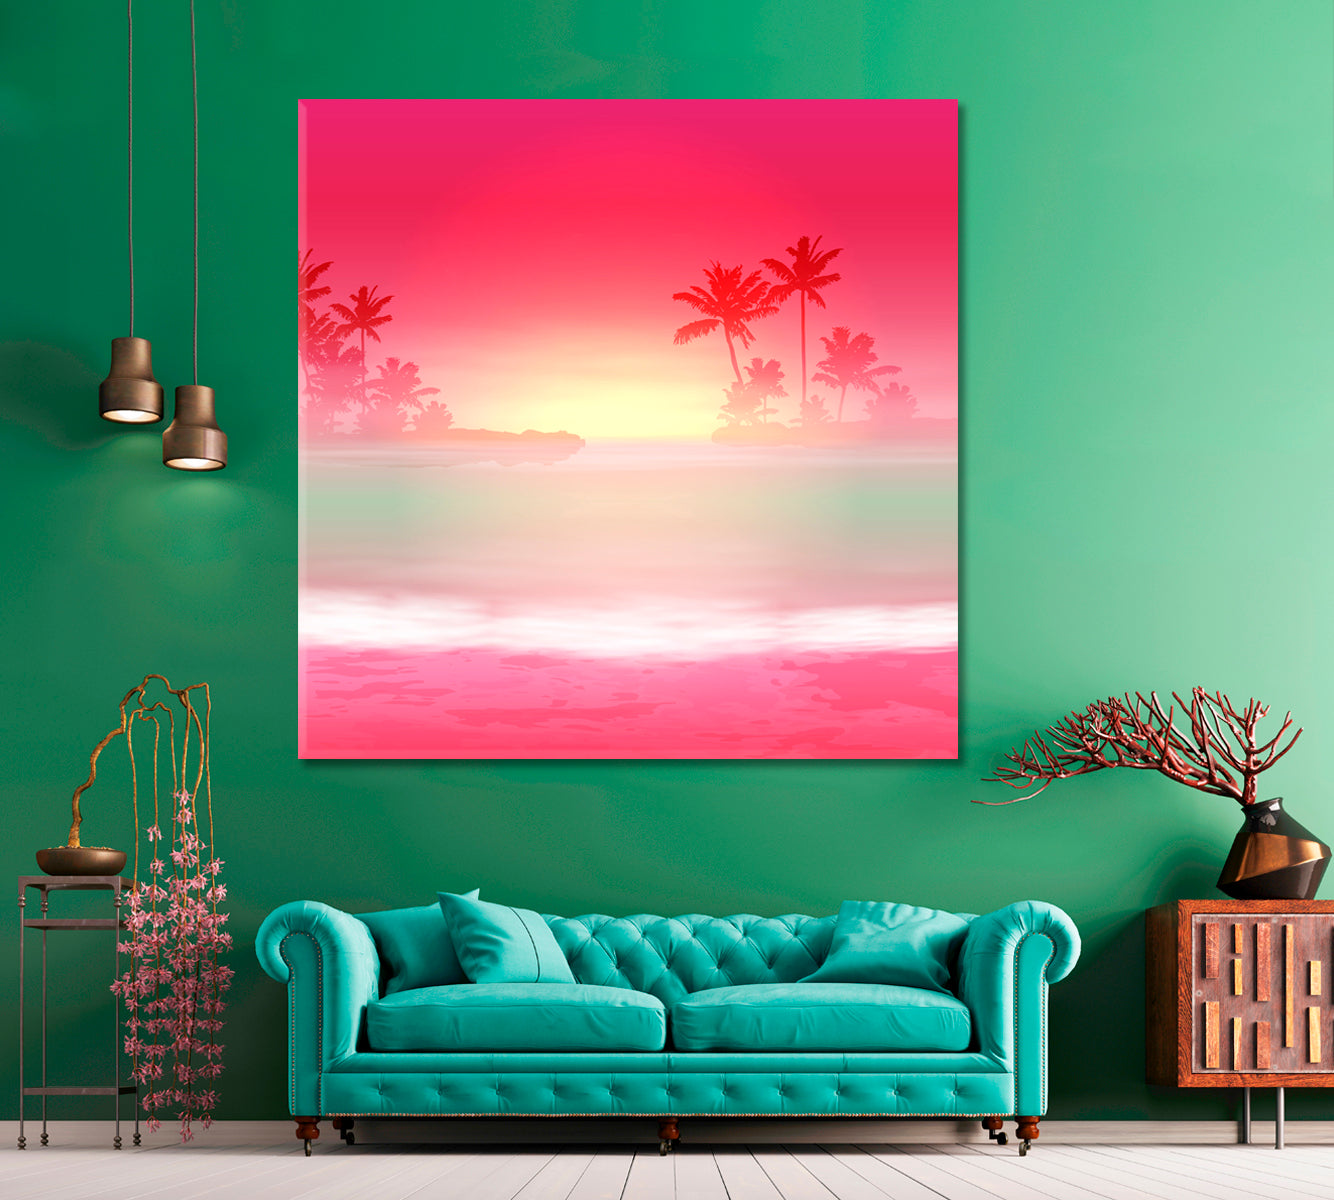 Sea with Palm Trees at Sunset Canvas Print ArtLexy 1 Panel 12"x12" inches 